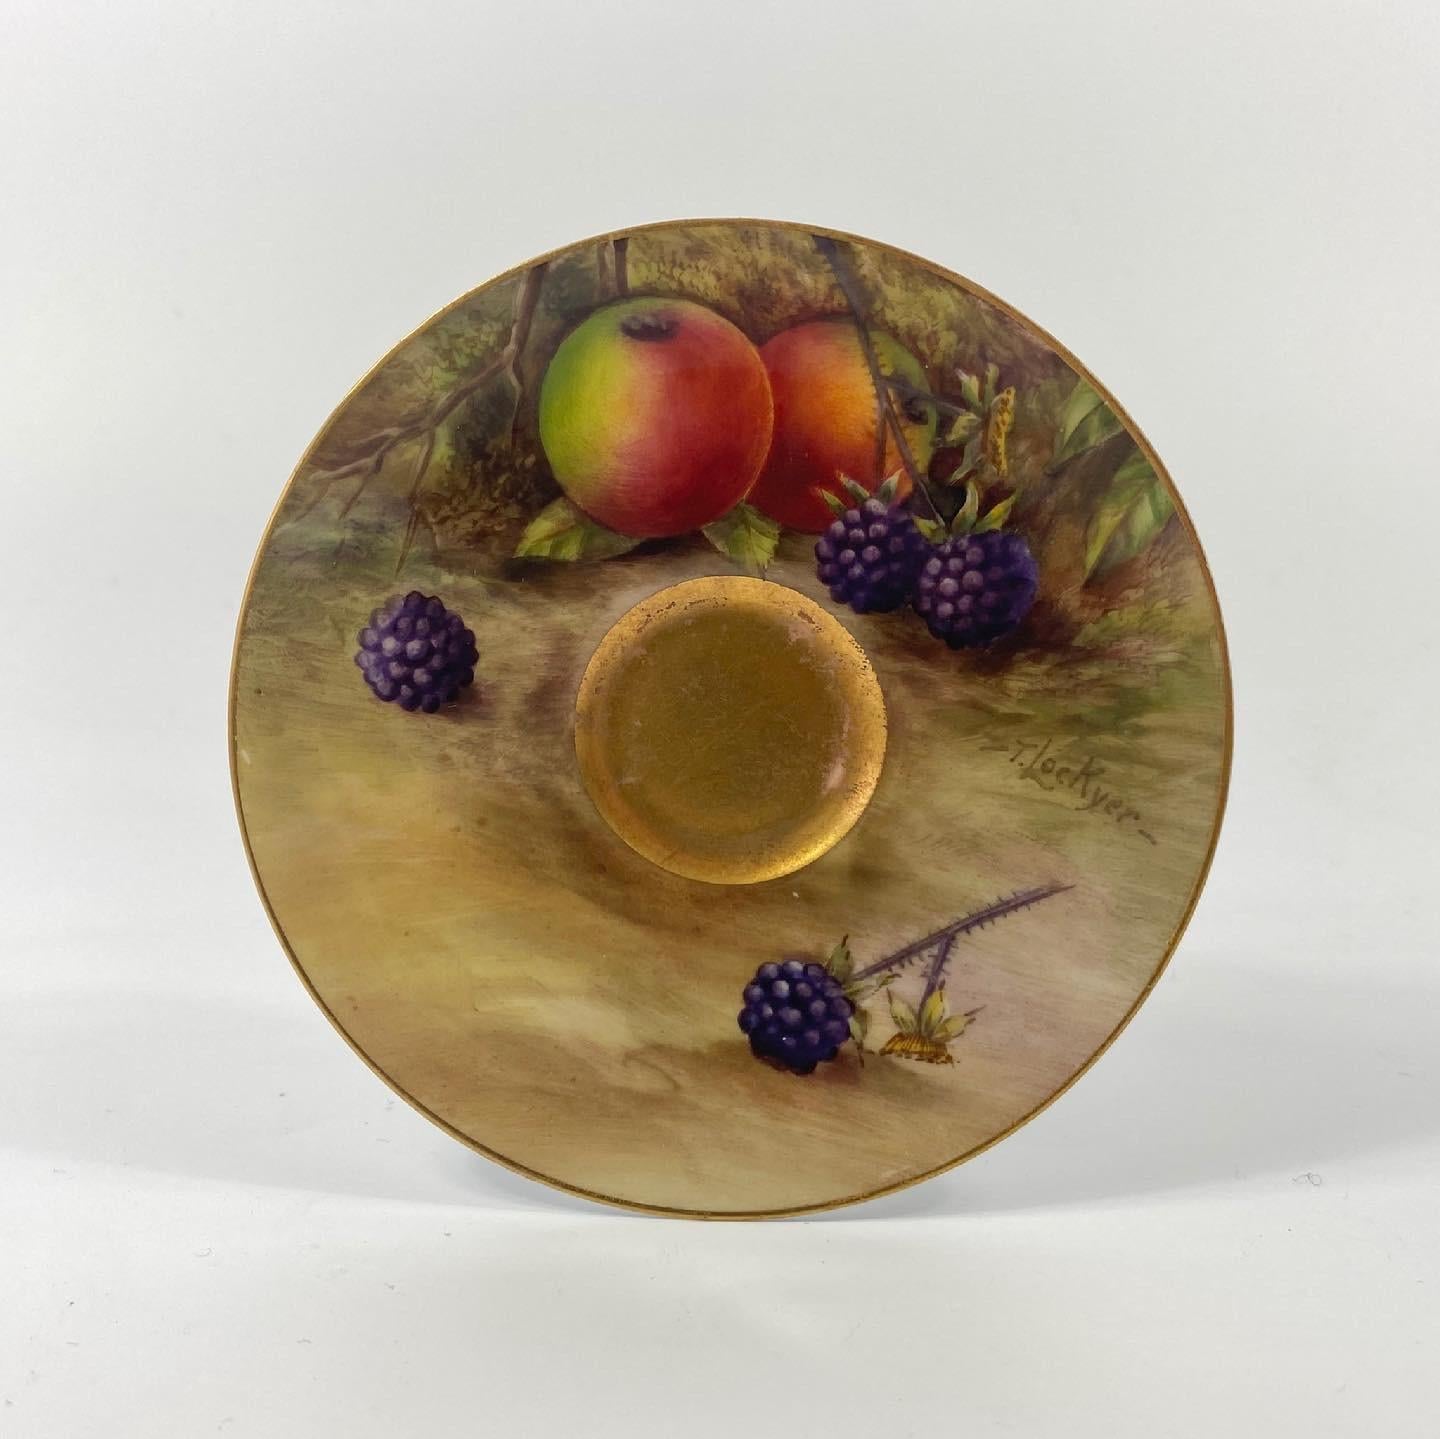 Royal Worcester porcelain cup & saucer, dated 1918. Both pieces finely painted with studies of fruit, on mossy banks. The saucer by F.Harper, the cup by T. Lockyer, and gilded to the exterior.
Printed puce factory marks, and date code for 1918 to